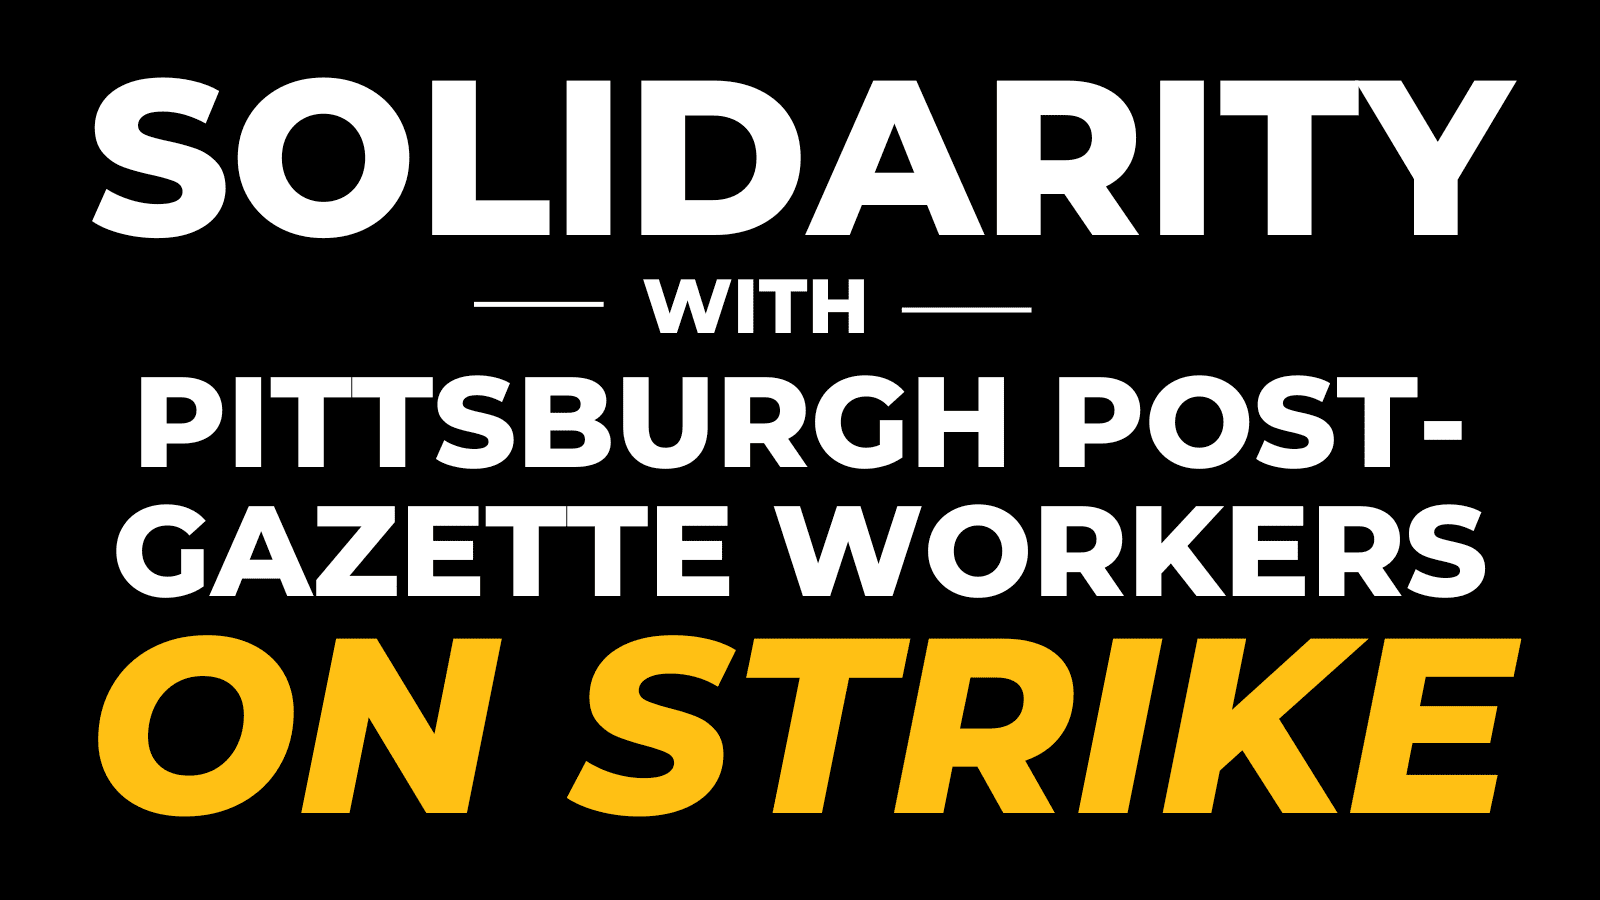 Solidarity with Pittsburgh Post-Gazette Workers On Strike